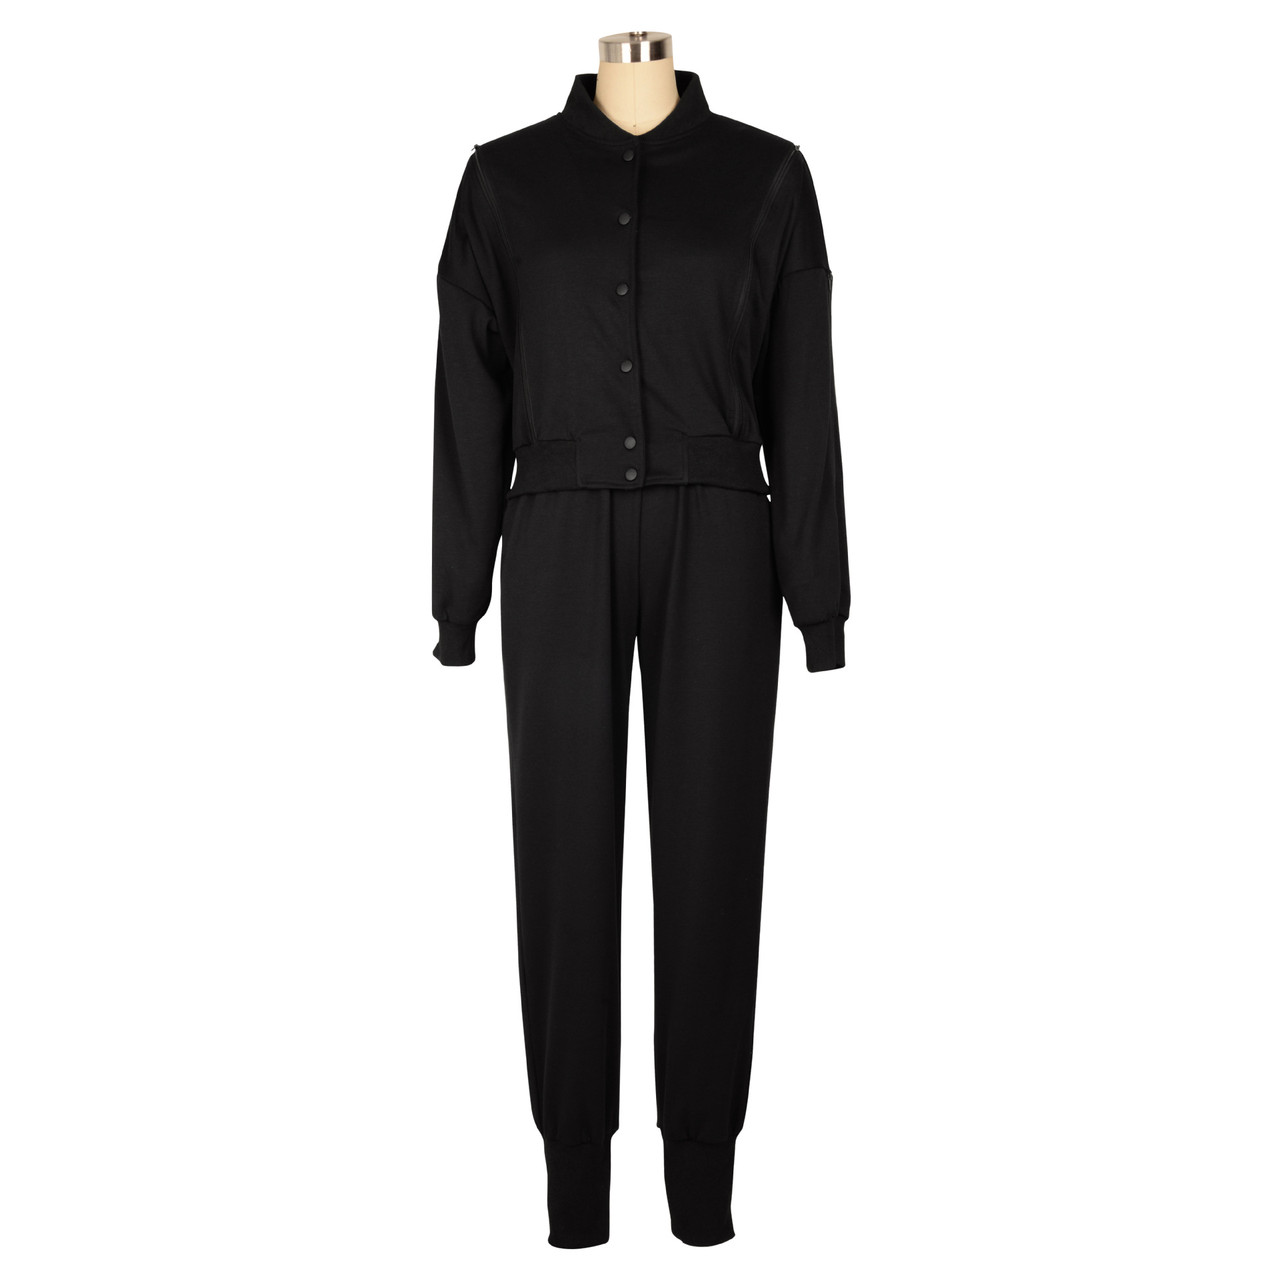 Women sports zipper jacket and Pant two-piece set - The Little Connection